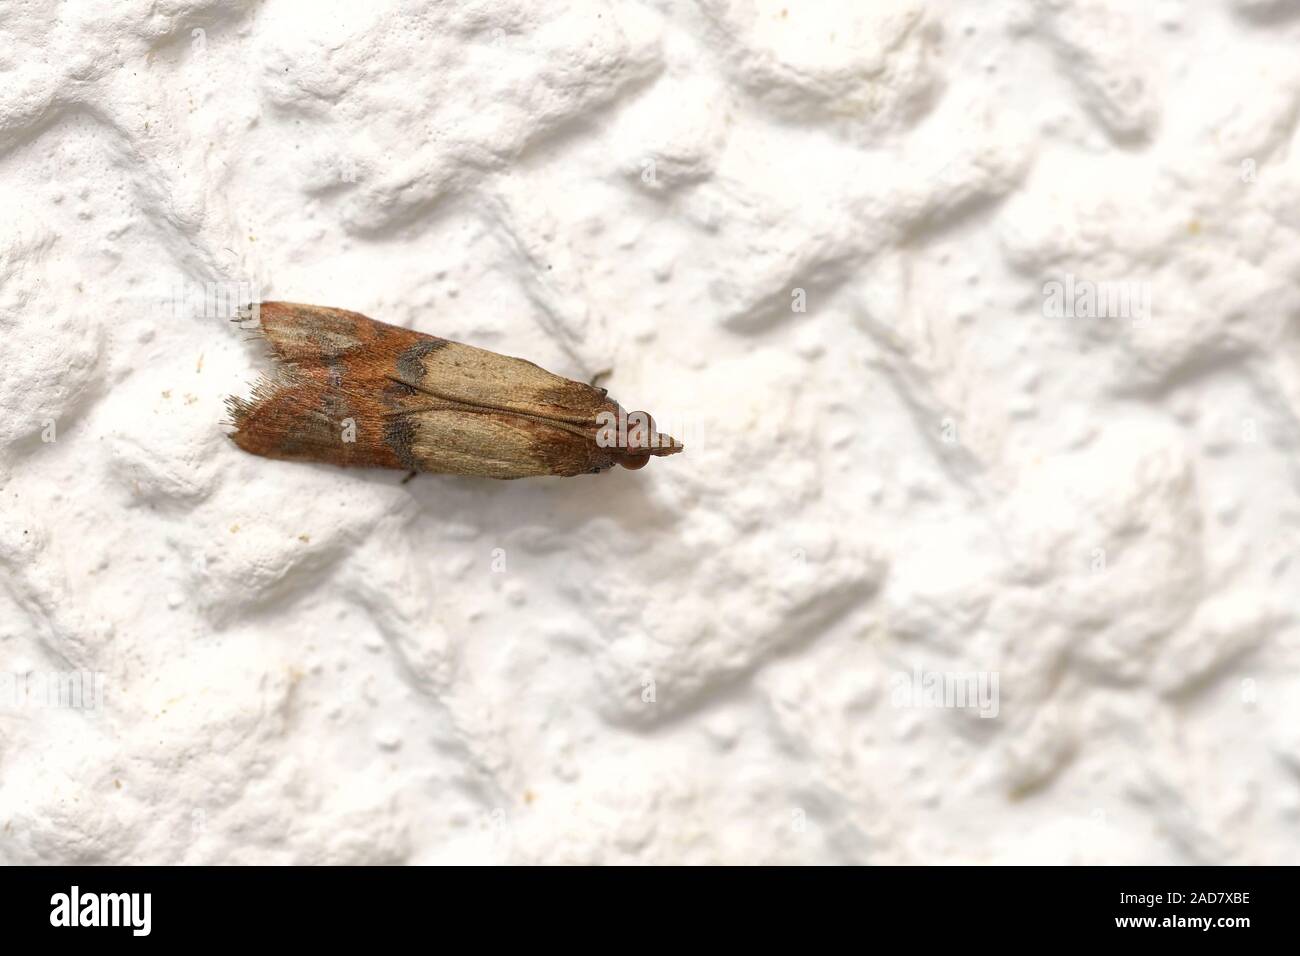 Indianmeal moth Stock Photo